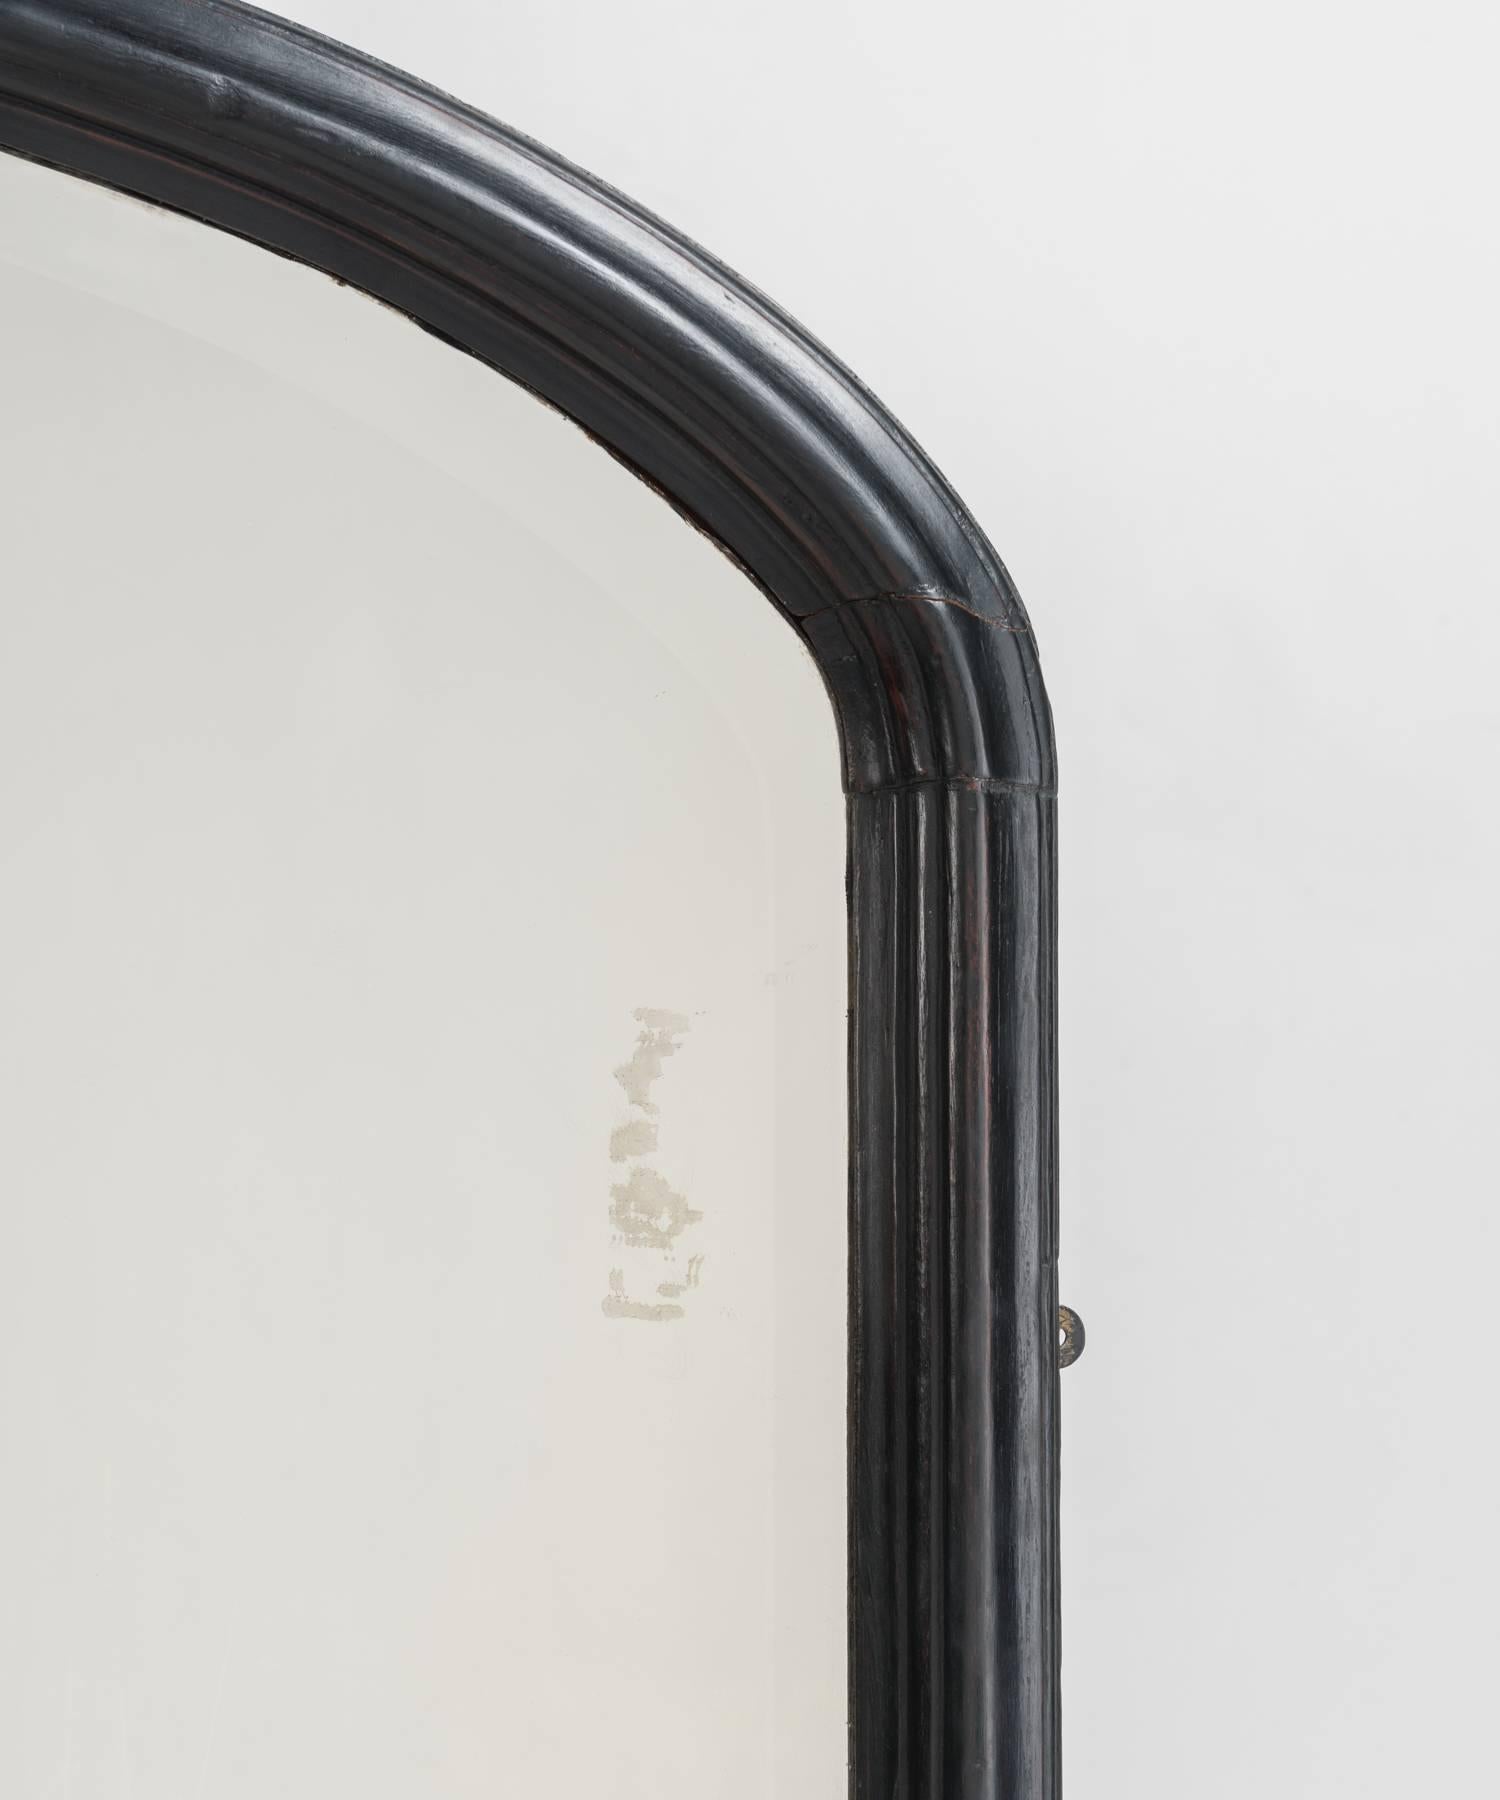 Arch top ebonised mirror, made in England, circa 1900.

Beautifully finished frame, with original plate glass mirror.